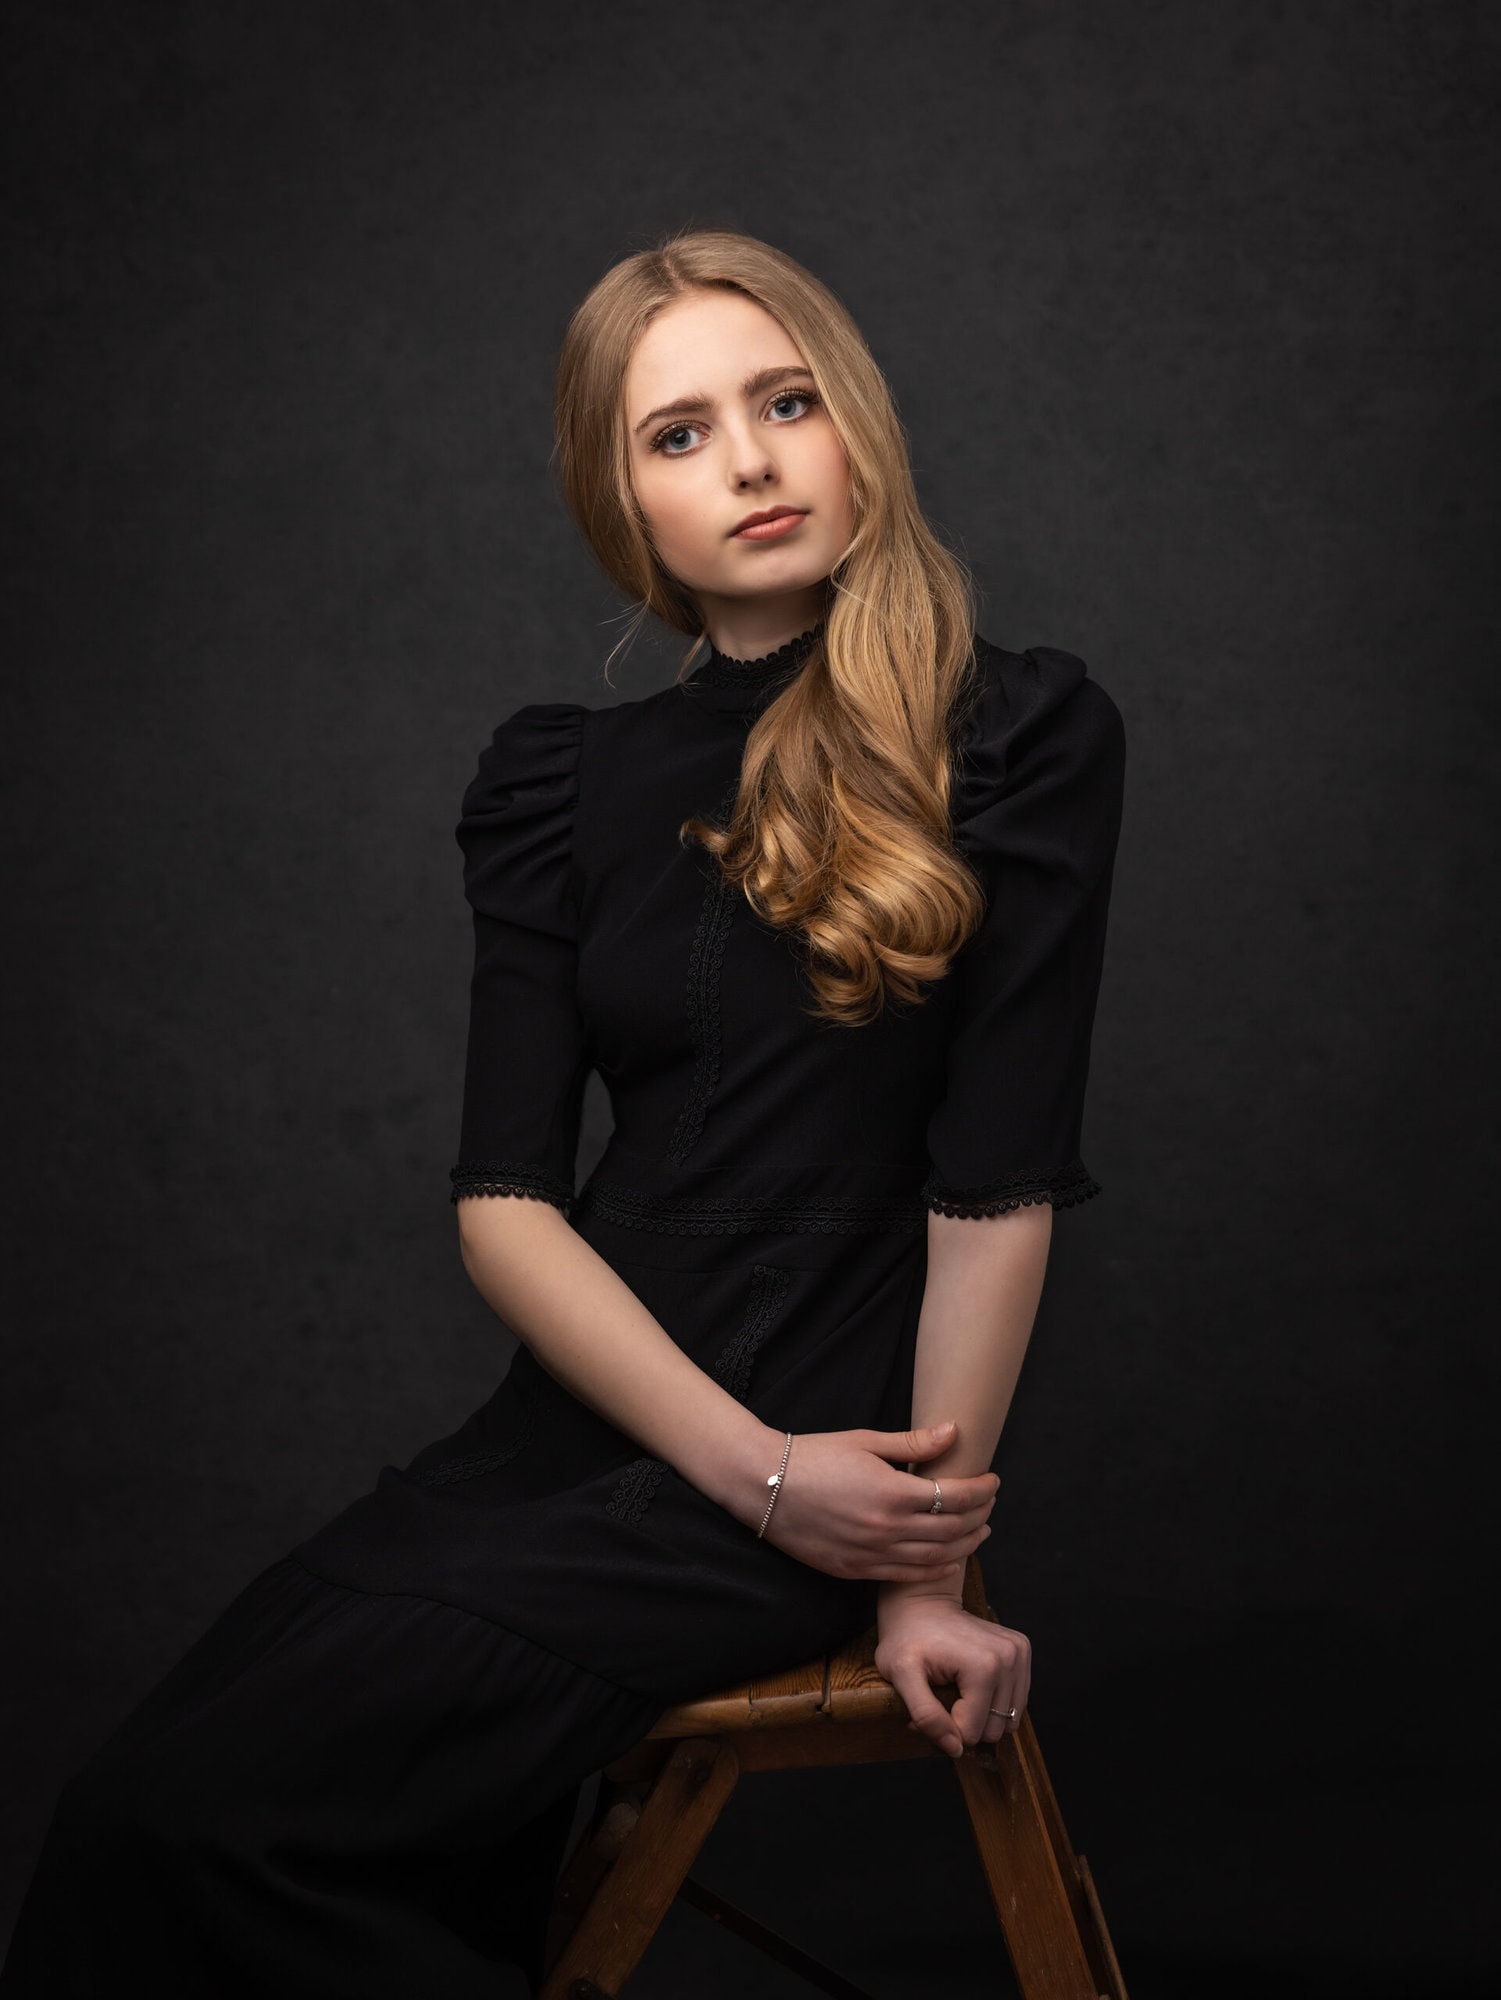 Teenage Girl in a black vintage dress poses for a Fine Art Portrait at Suffolk Photography Studio